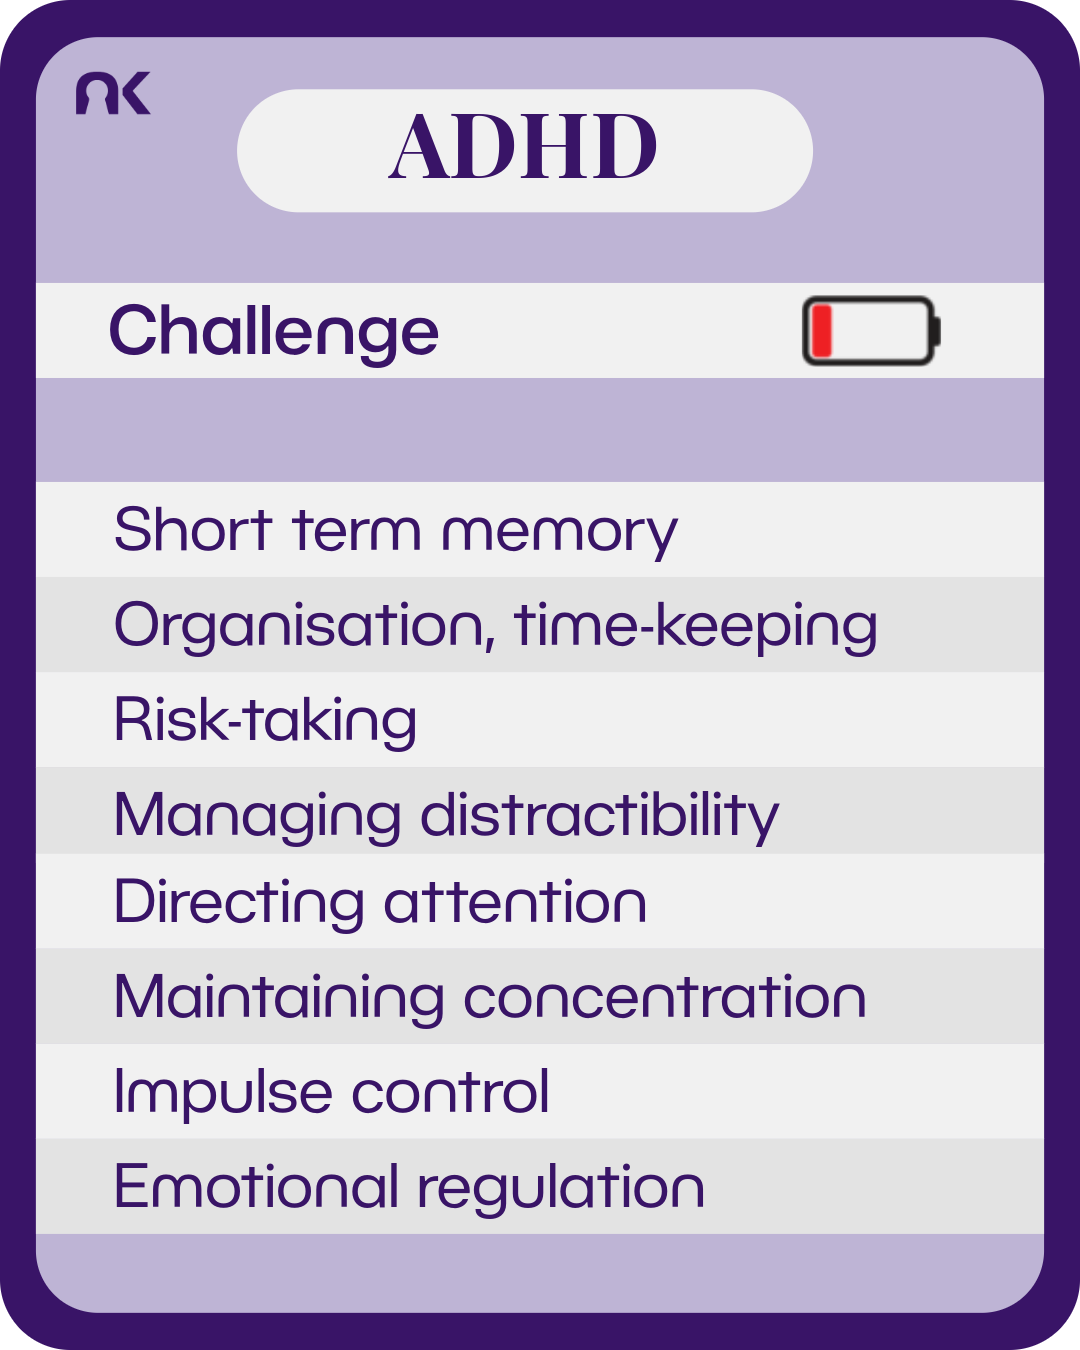 An information card made to look like it is from a card game. Next to the subtitle "challenge" is a battery with red bar to show low charge. Text says: "ADHD. Challenge. Short term memory; Organisation, time-keeping; Risk-taking; Managing distratibility; Directing attention; Maintaining concentration; Impulse control; Emotional regulation."